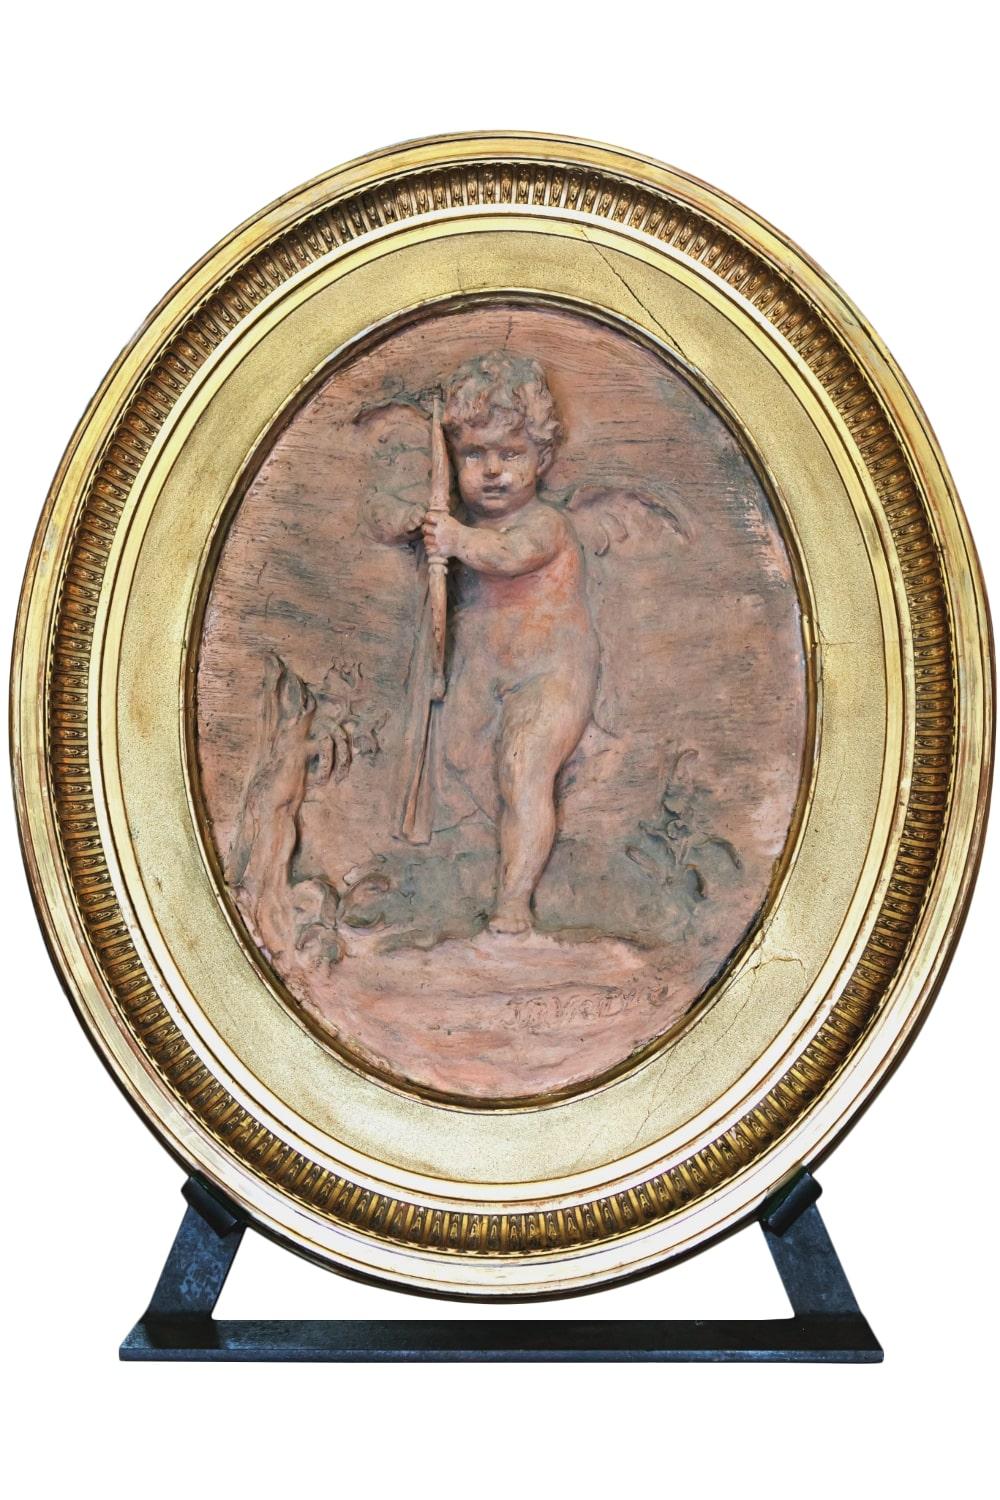 Fabulous pair of signed Jean Baptiste Vietty oval terracotta bas relief with iron stands, circa 1807. Each giltwood framed plaque features a cherub or putto with bow and quiver and is signed JB VIETTY on front. The reverse is signed JB VIETTY 1807